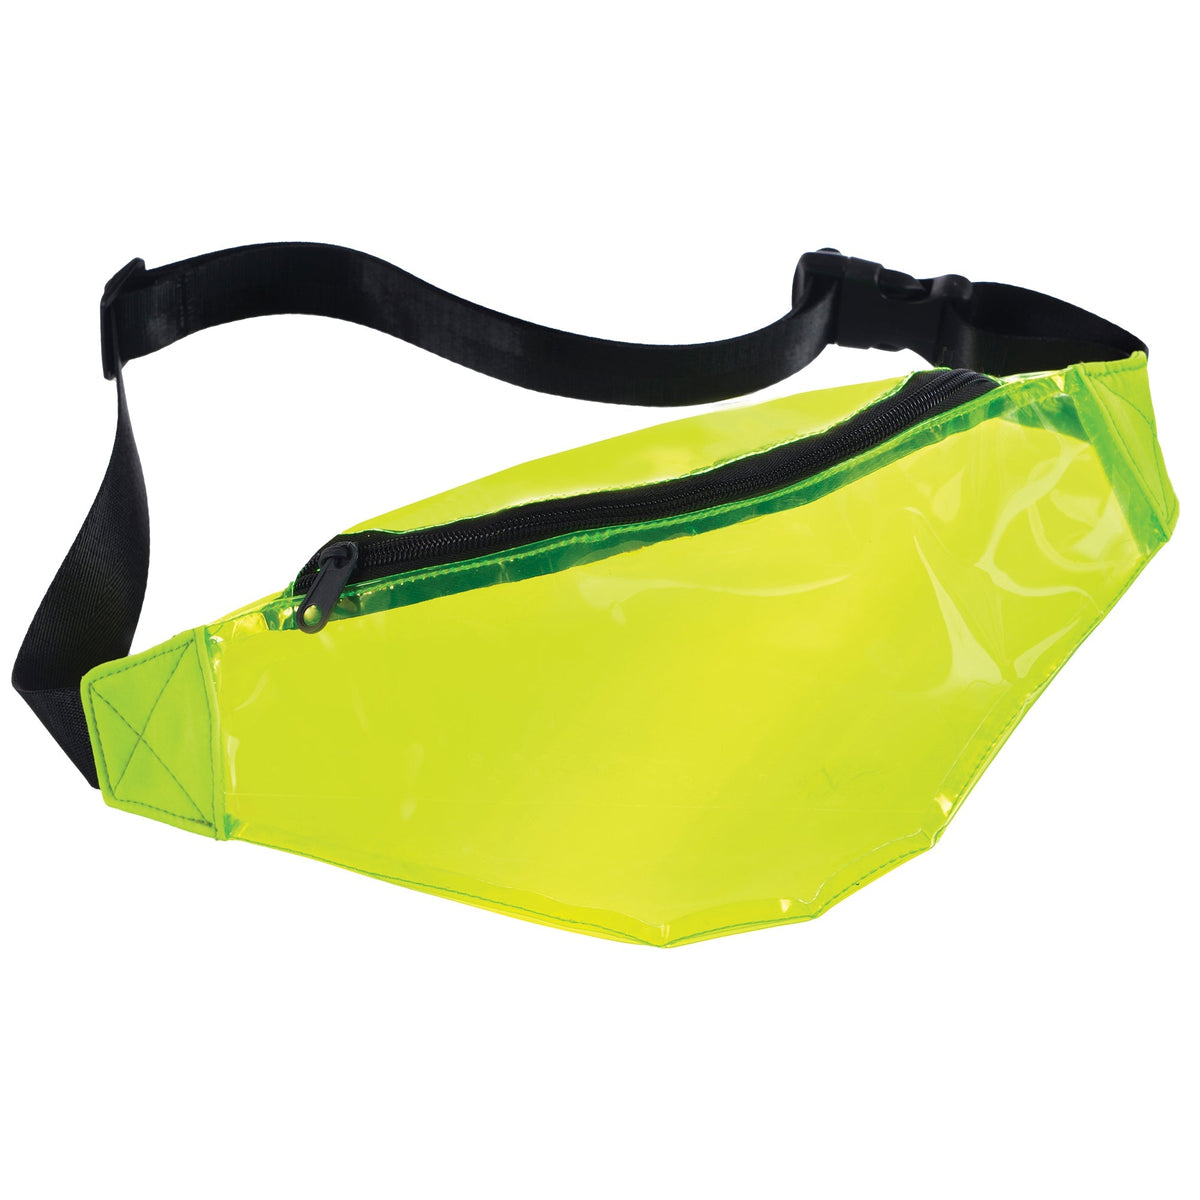 SUIT YOURSELF COSTUME CO. Costume Accessories Neon Shine Fanny Pack 192937263433